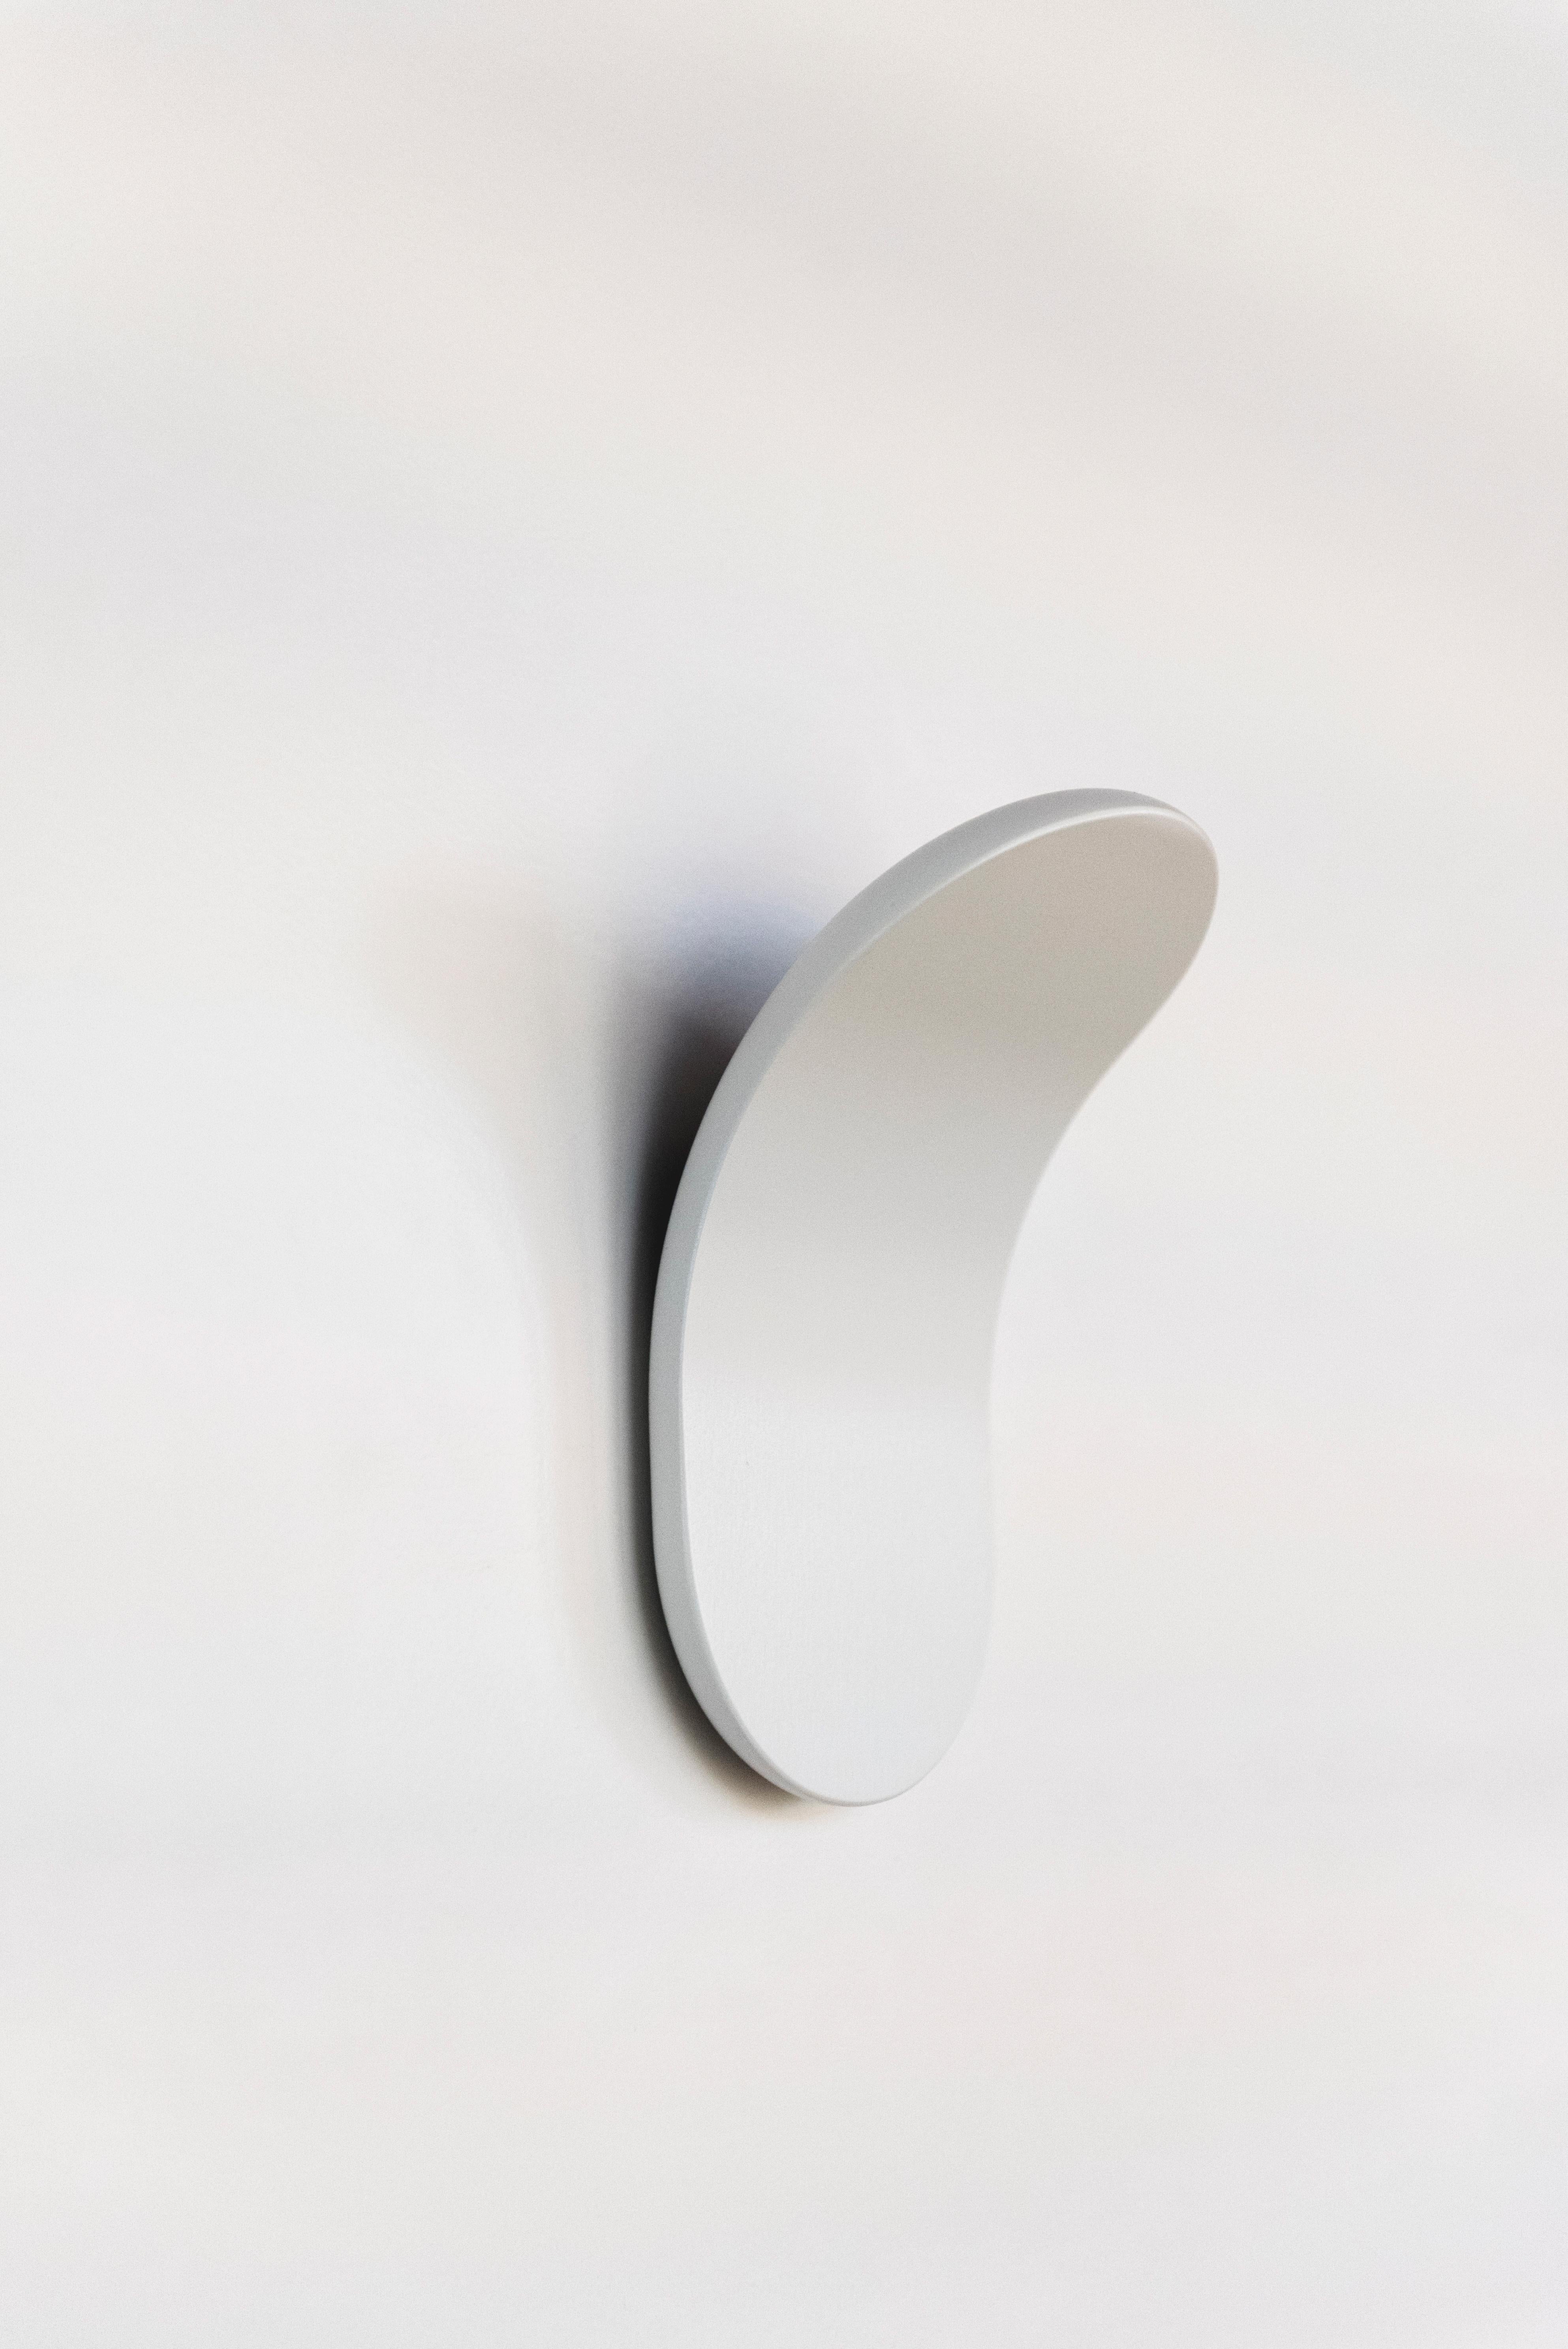 Axolight Lik Wall Lamp in Wrinkled White Aluminum by Serge & Robert Cornelissen

Lik has a soft design and its intense light hidden in the back spreads with harmonious reflections on the wall. Essential simplicity and formal technology are combined